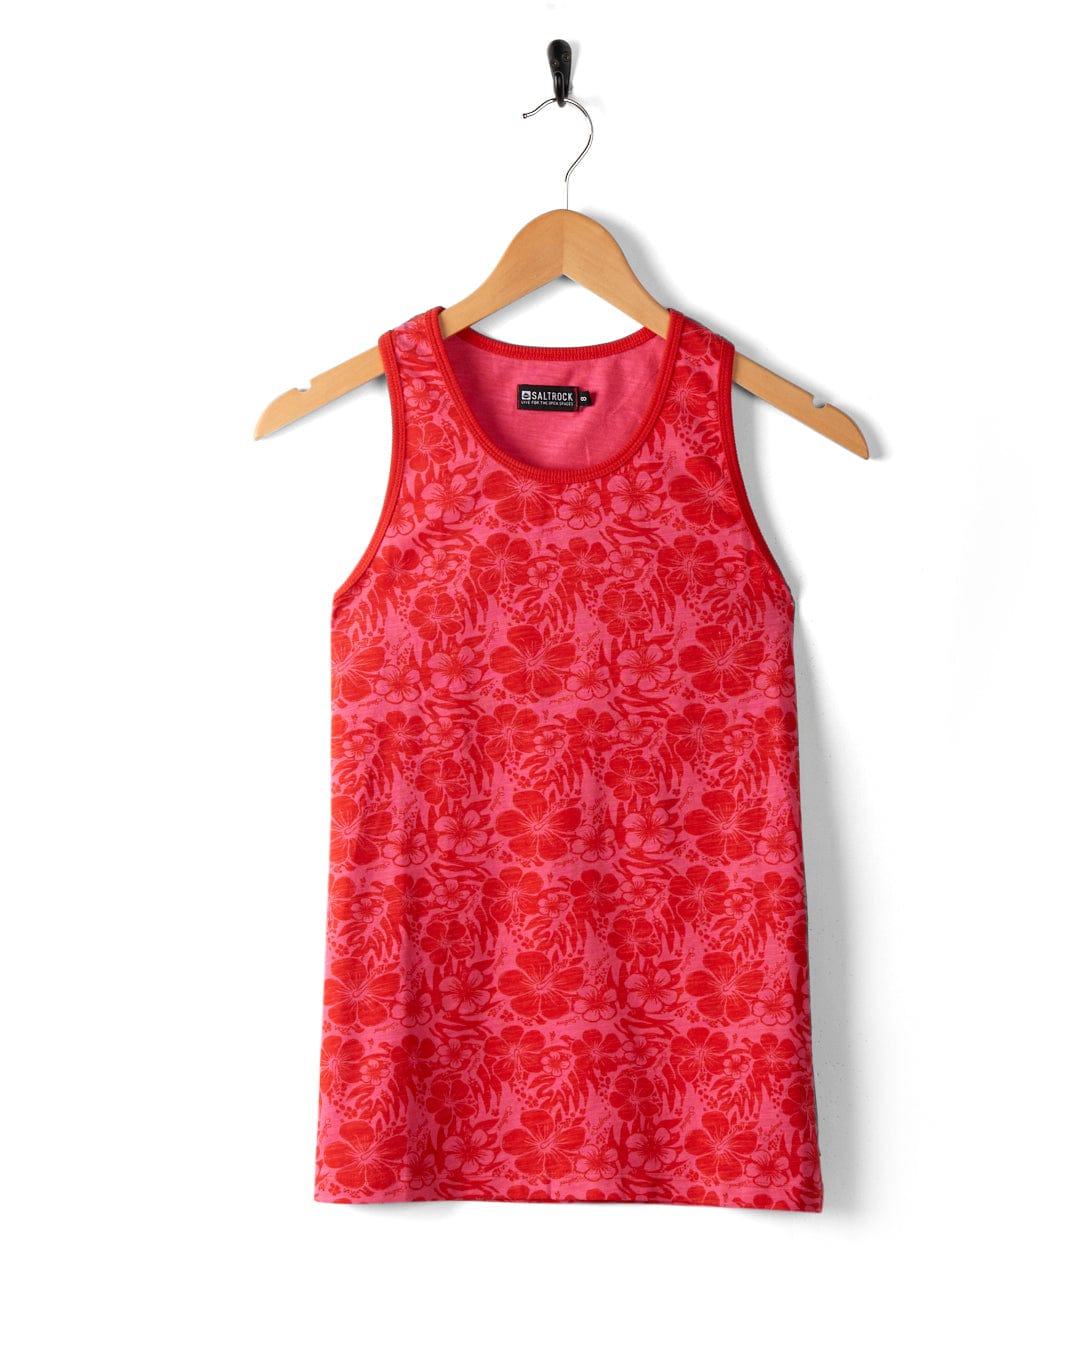 A Saltrock Hibiscus - Womens Vest - Red is displayed on a wooden hanger against a white background.